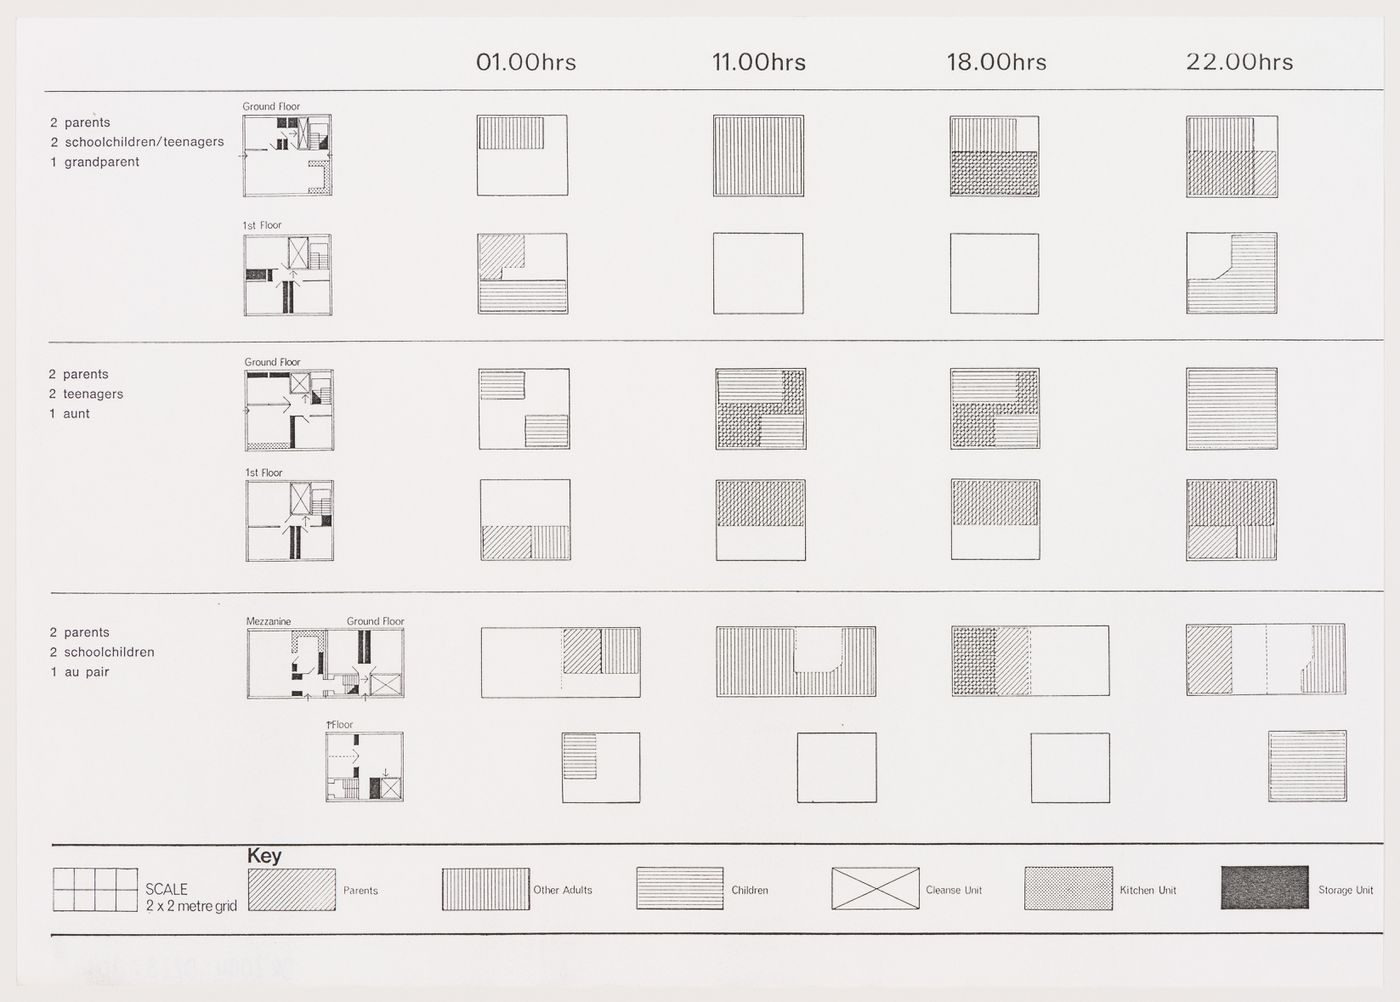 Plans for housing units showing occupation of space at different times of the day,  from the project file "Housing Research"